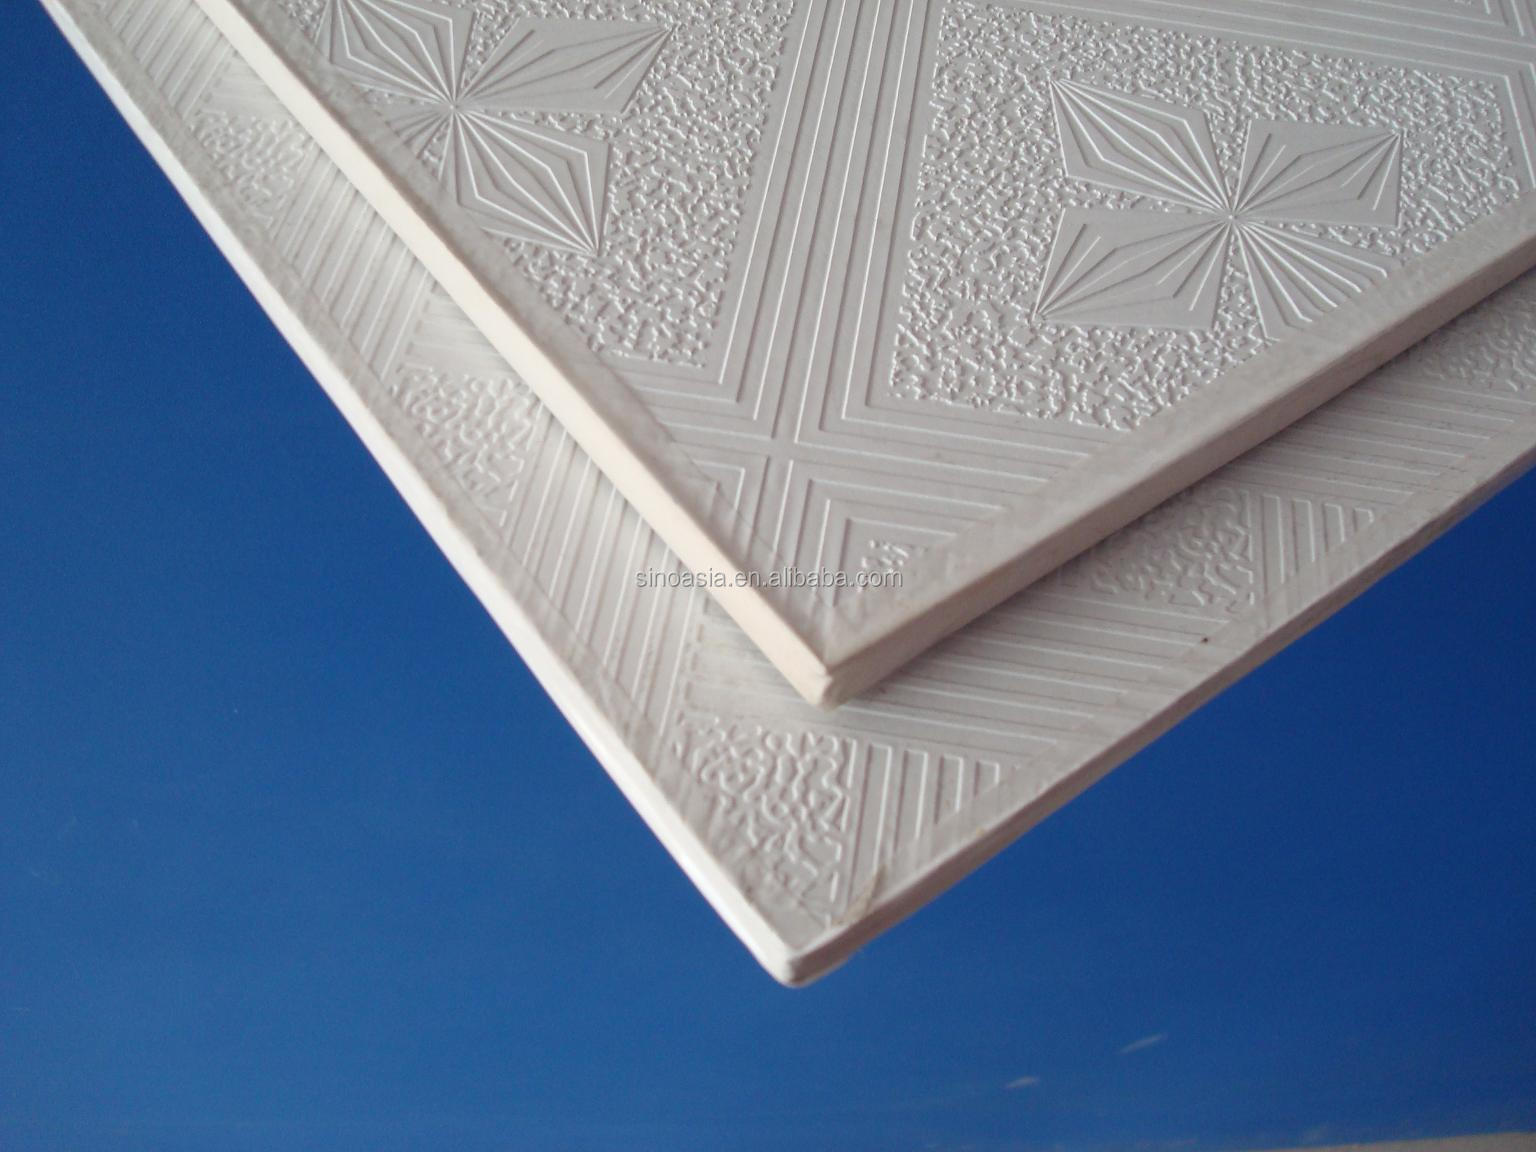 Waterproof 60x60 Pvc Gypsum Ceiling Tiles With Aluminum Foil View 60x60 Pvc Gypsum Ceiling Tiles Sino Asia Product Details From Beijing Sino Asia